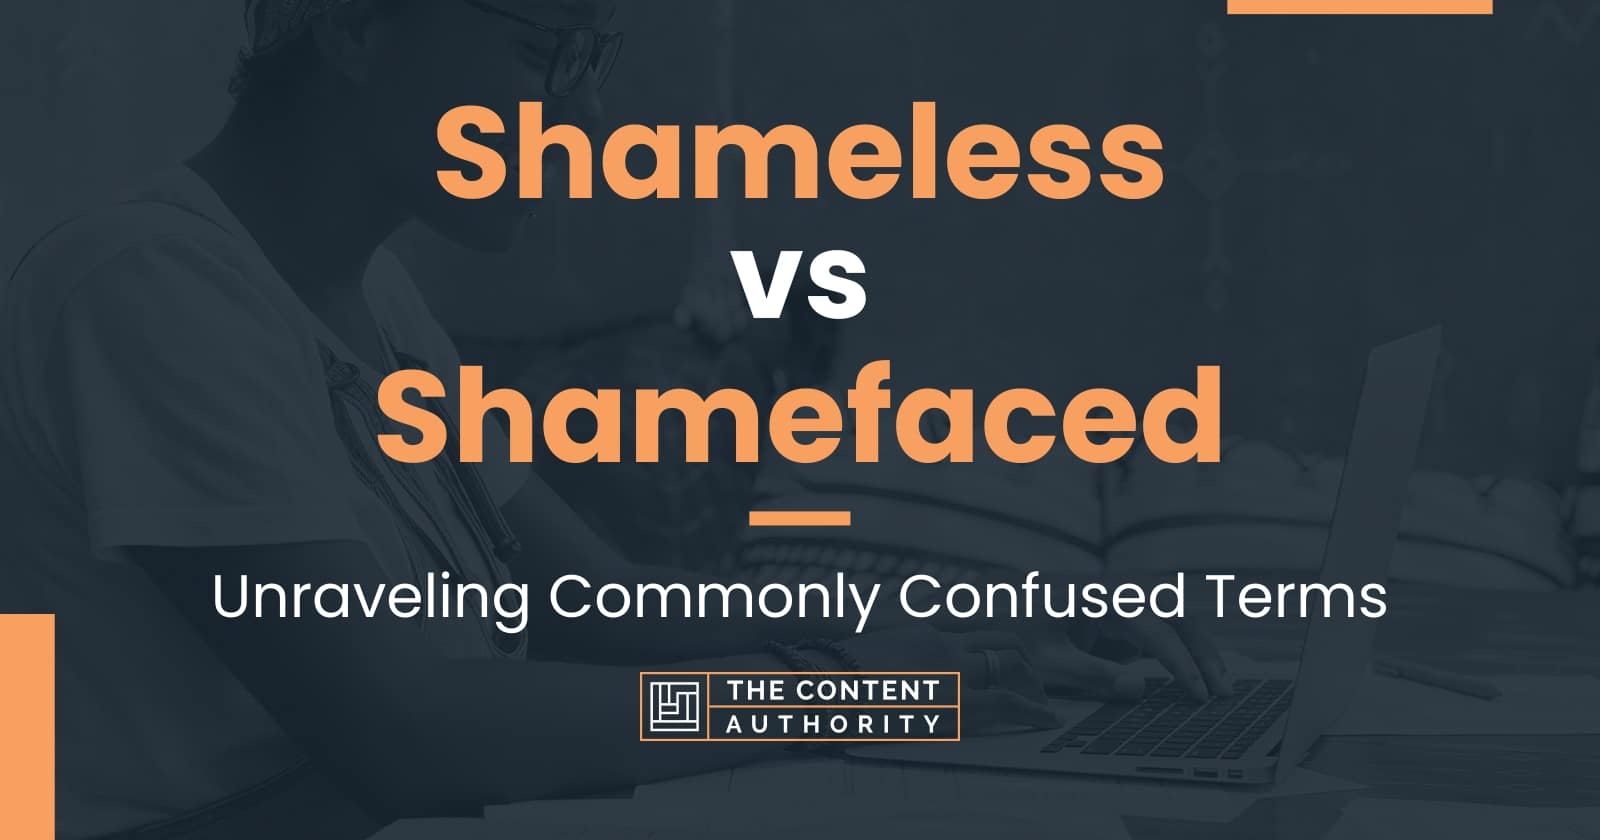 Shameless vs Shamefaced: Unraveling Commonly Confused Terms